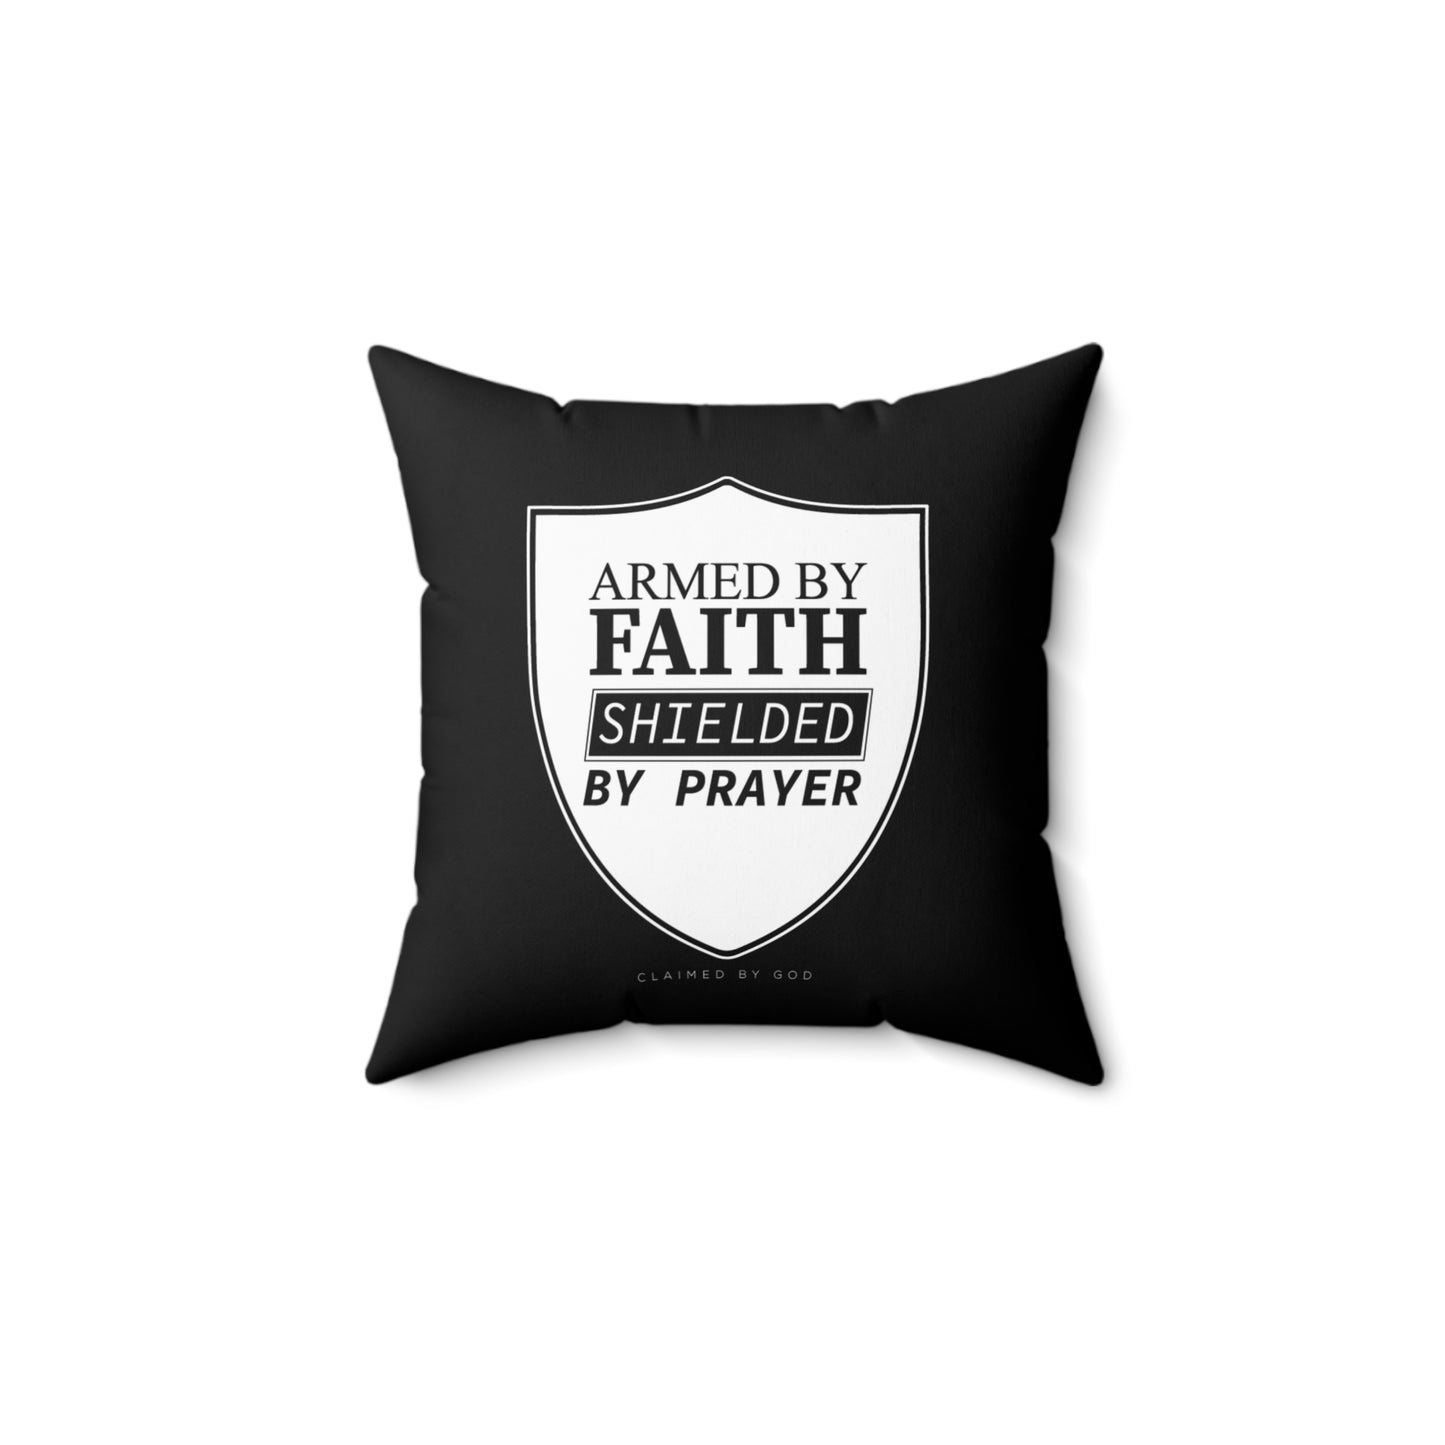 Armed By Faith Shielded By Prayer Pillow